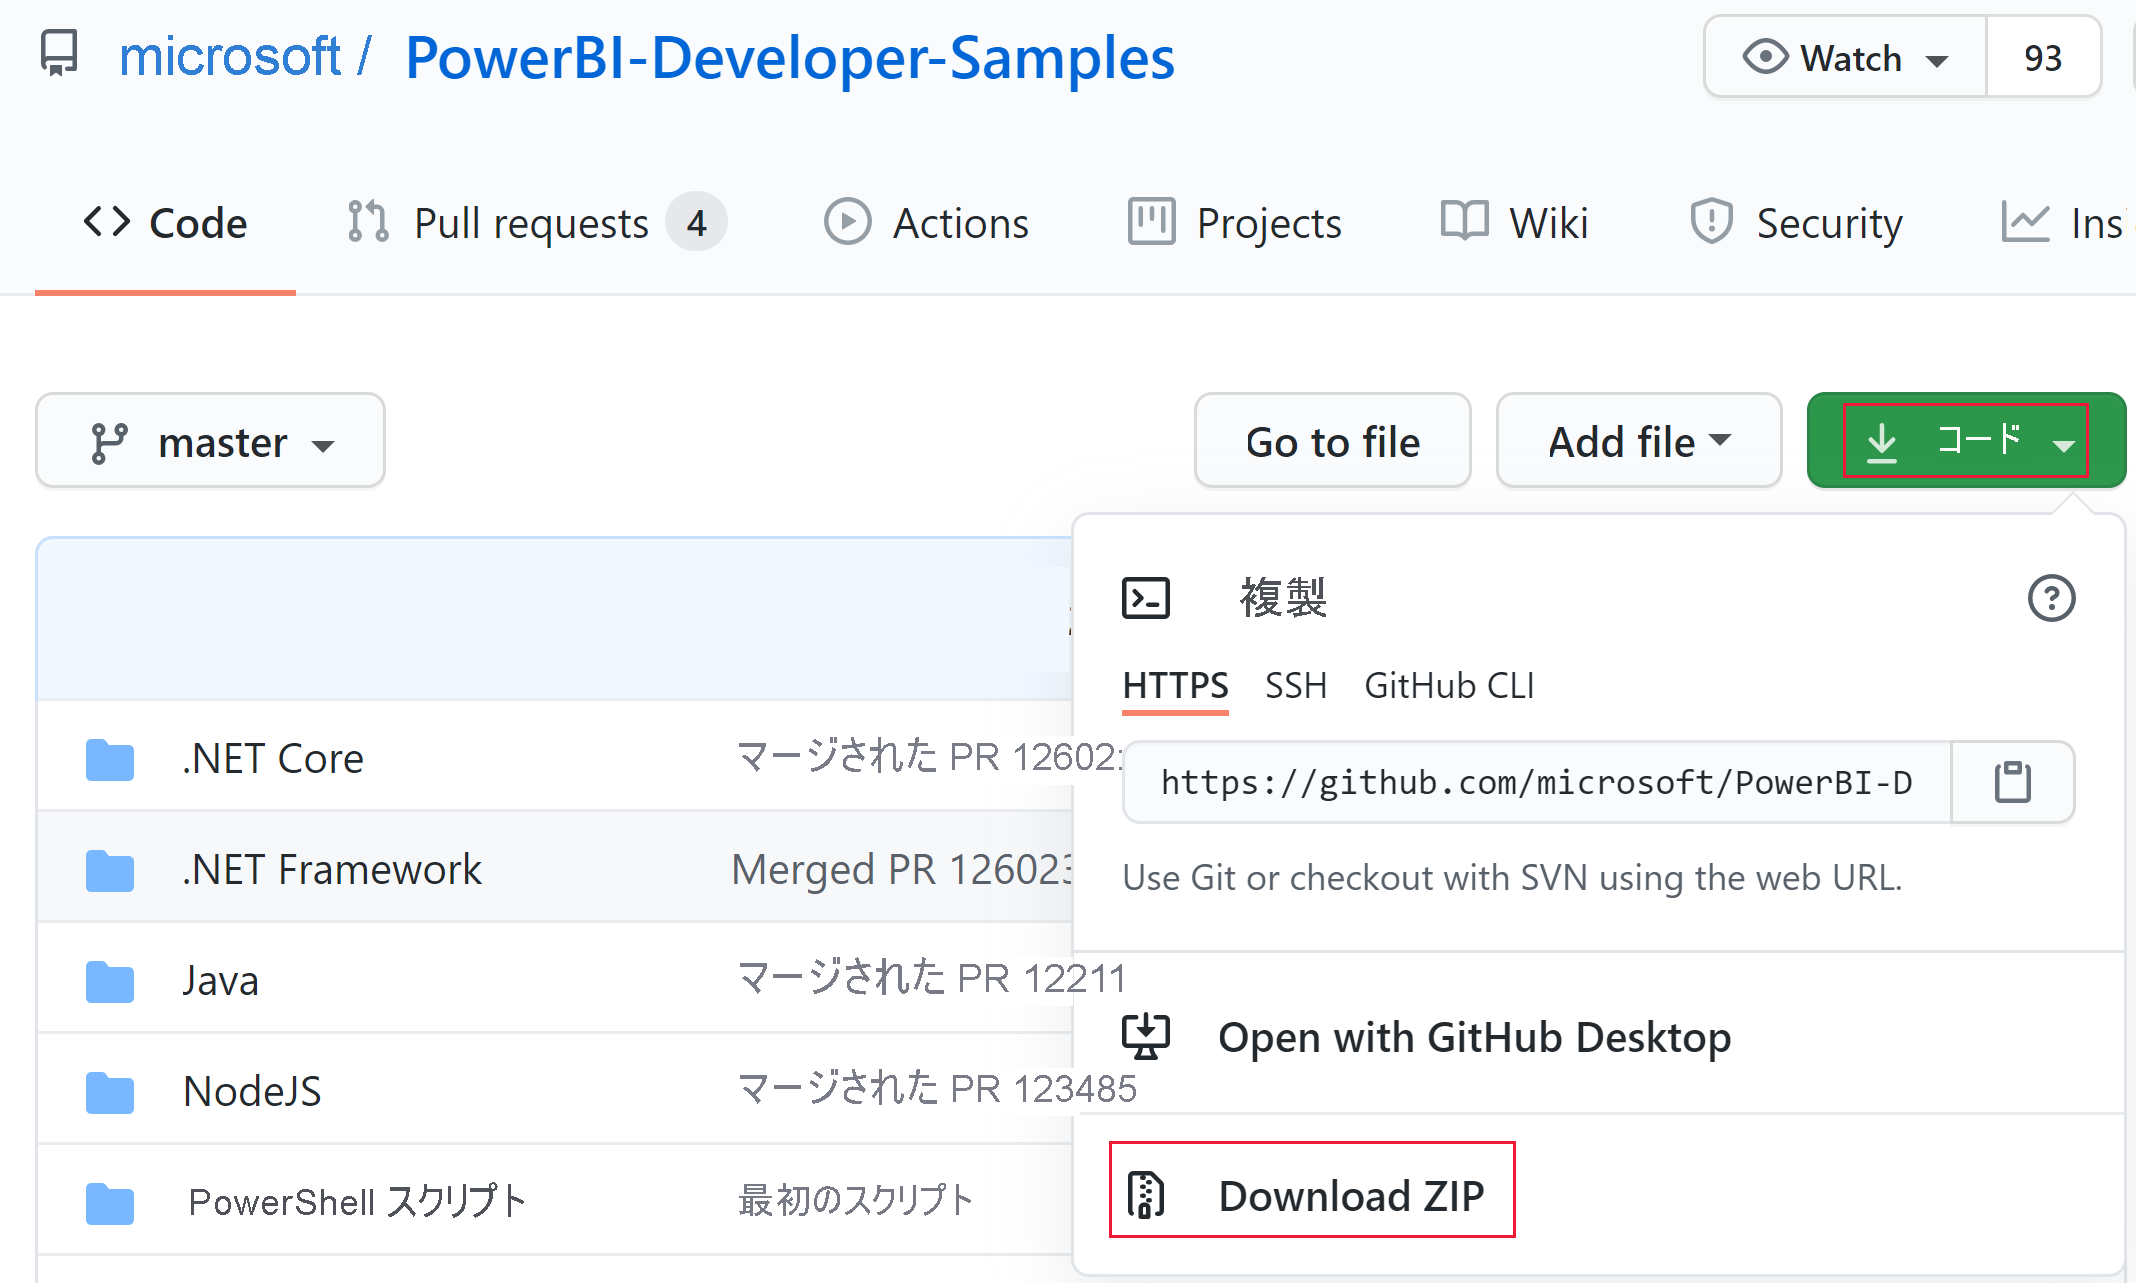 A screenshot showing the ZIP download option in the Power B I developer samples GitHub